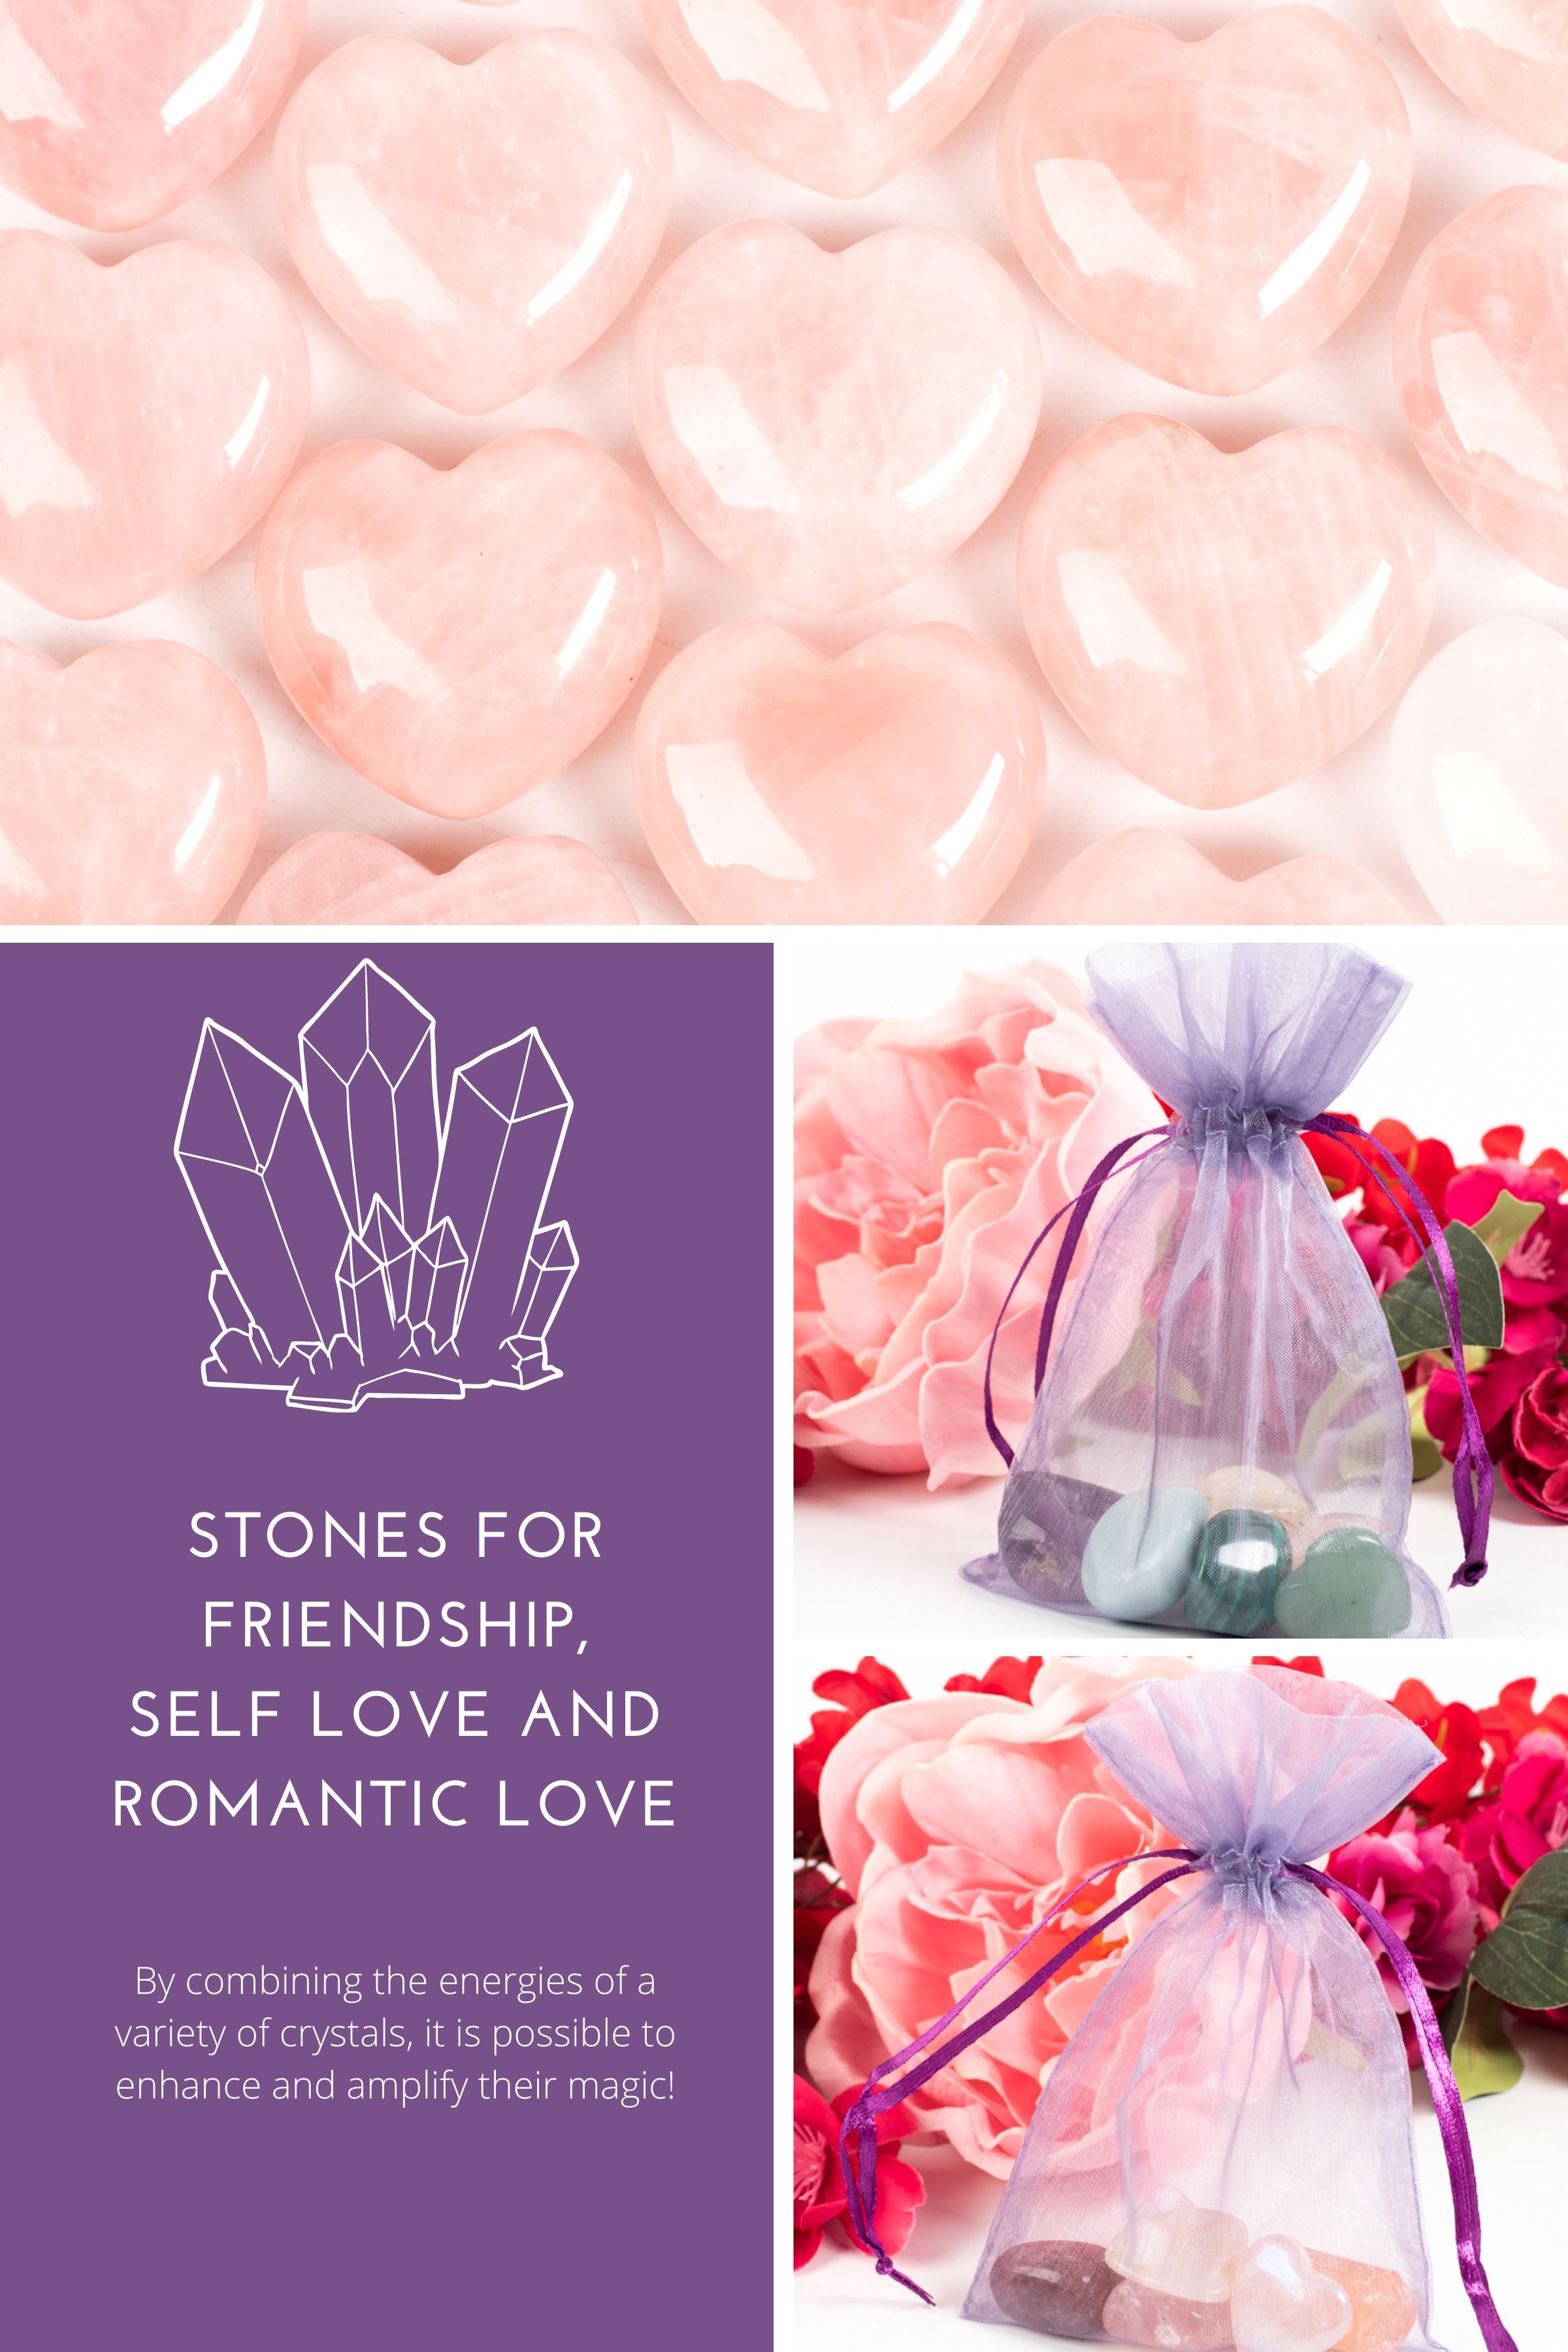 Stones for Friendship, Self Love and Romantic Love